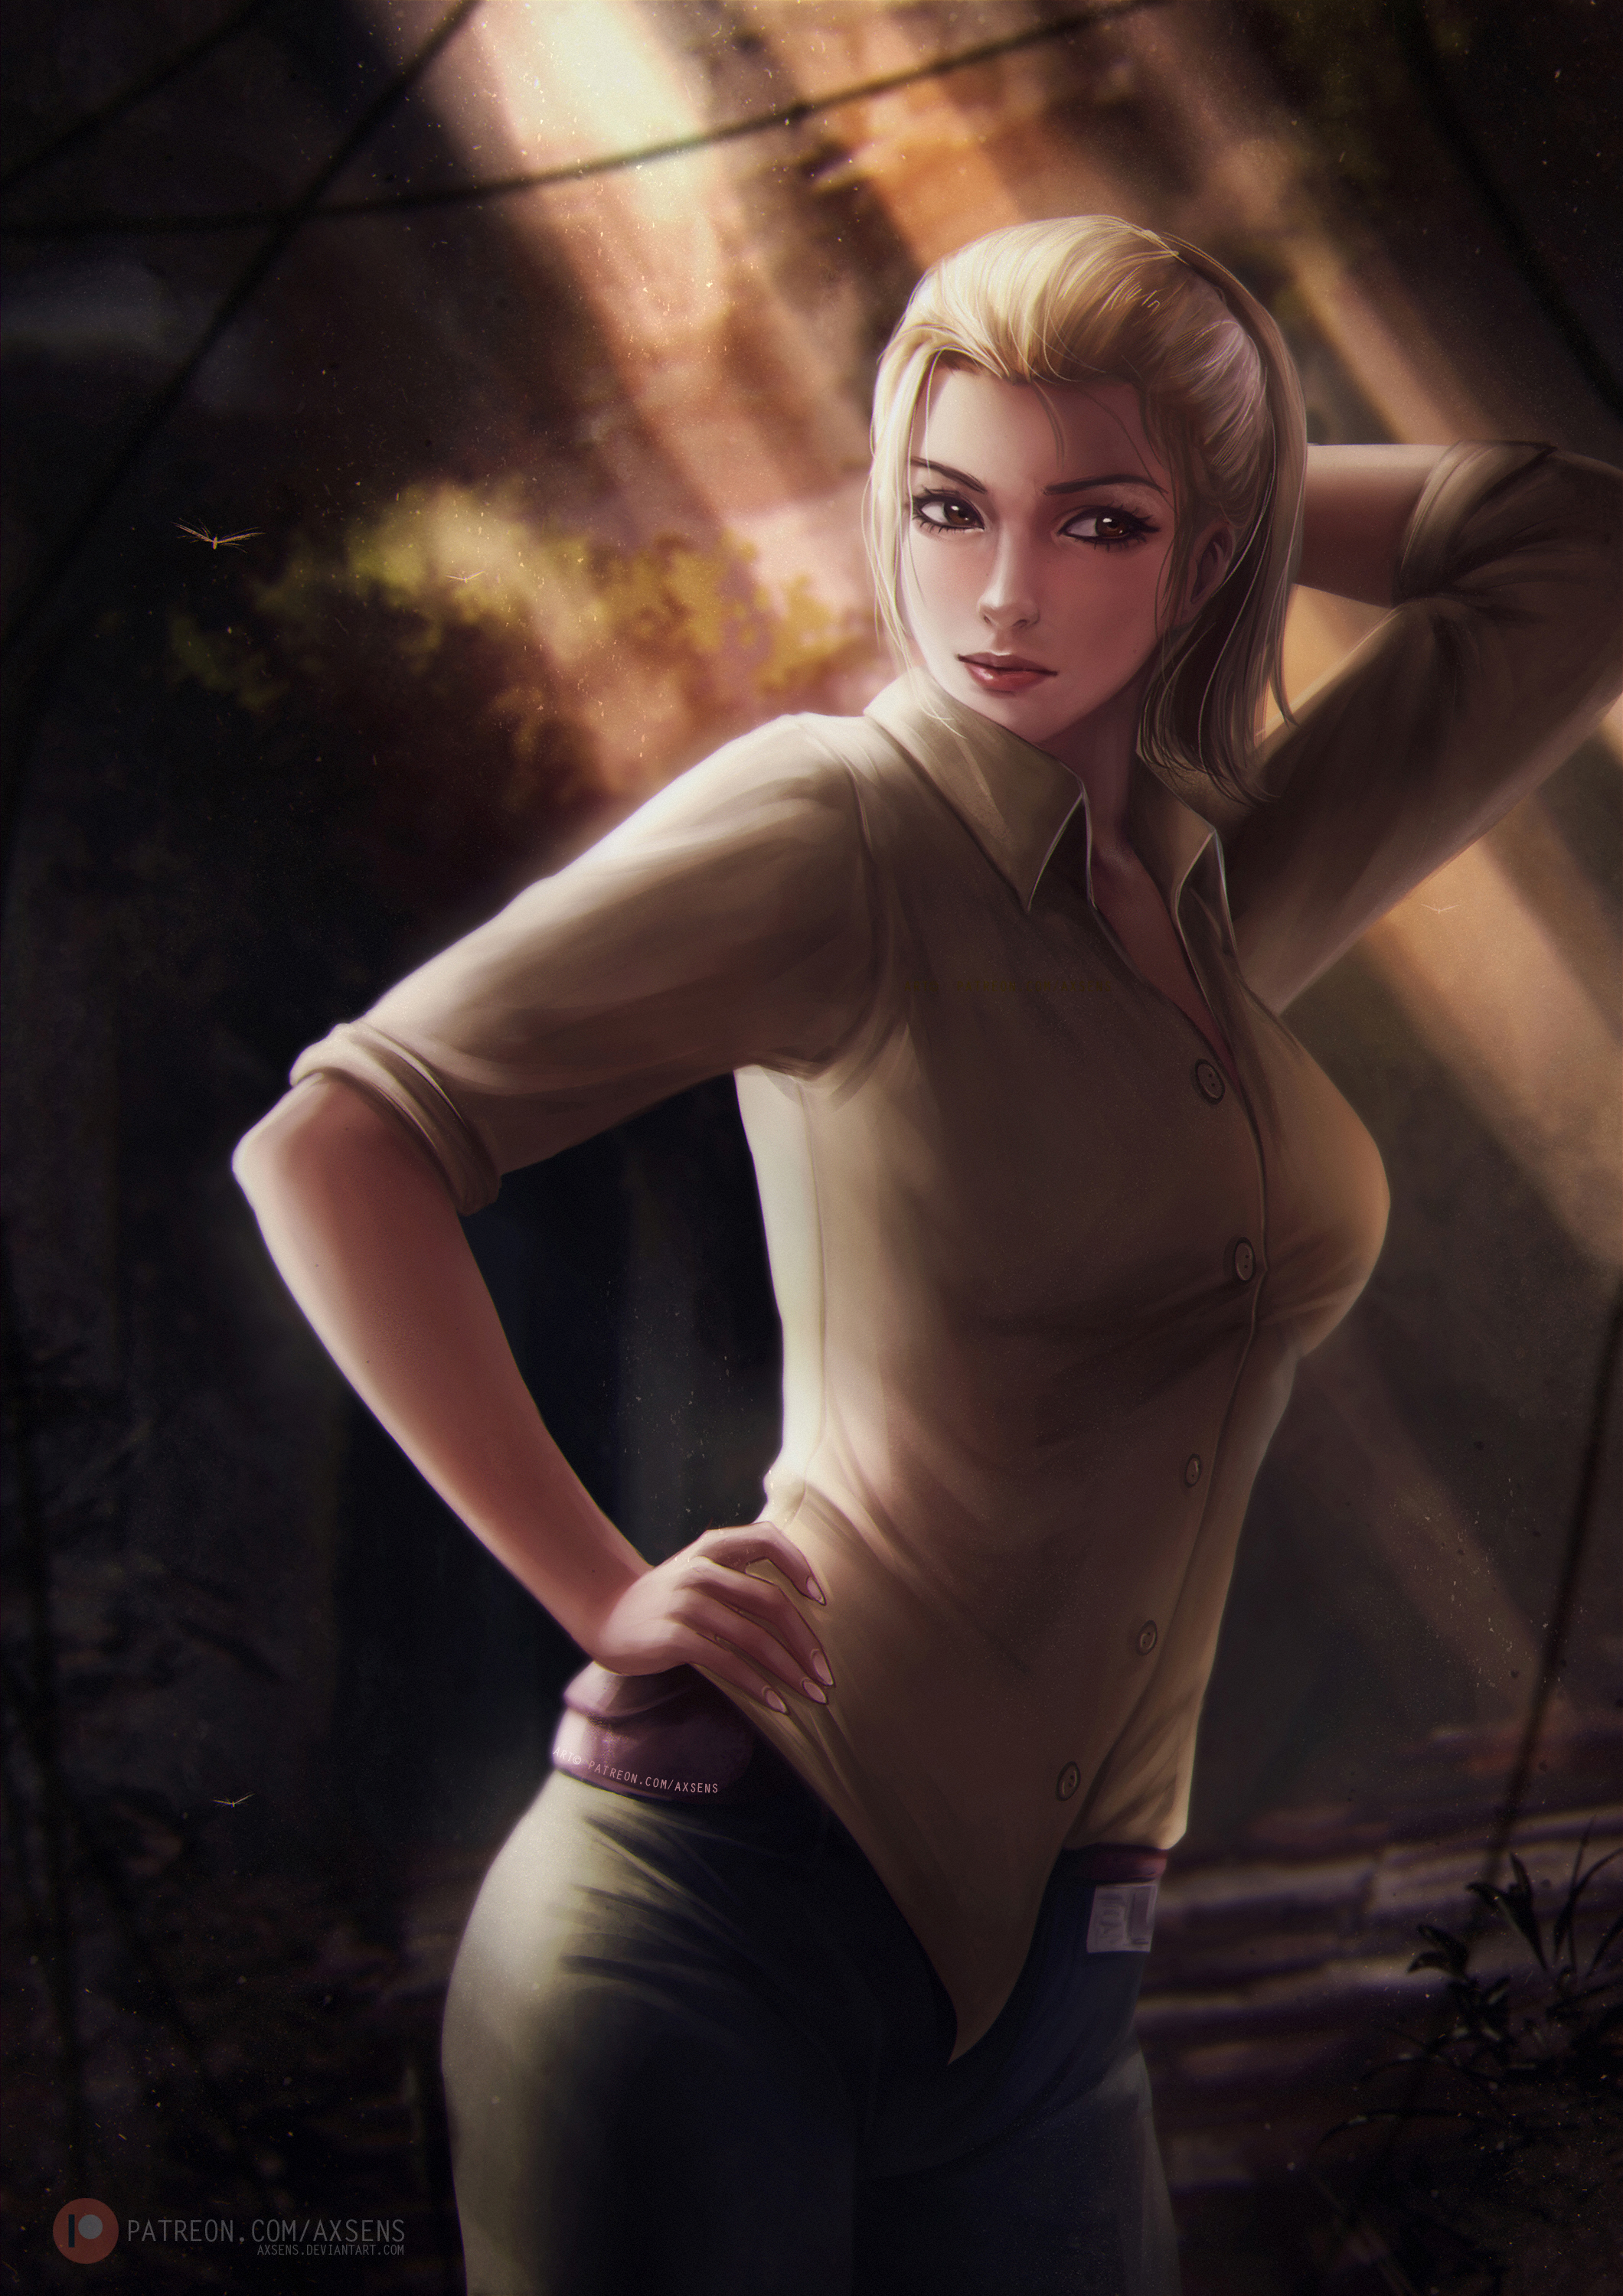 Video Games Video Game Characters Video Game Girls Elena Fisher Uncharted Digital Art Illustration F 2120x3000